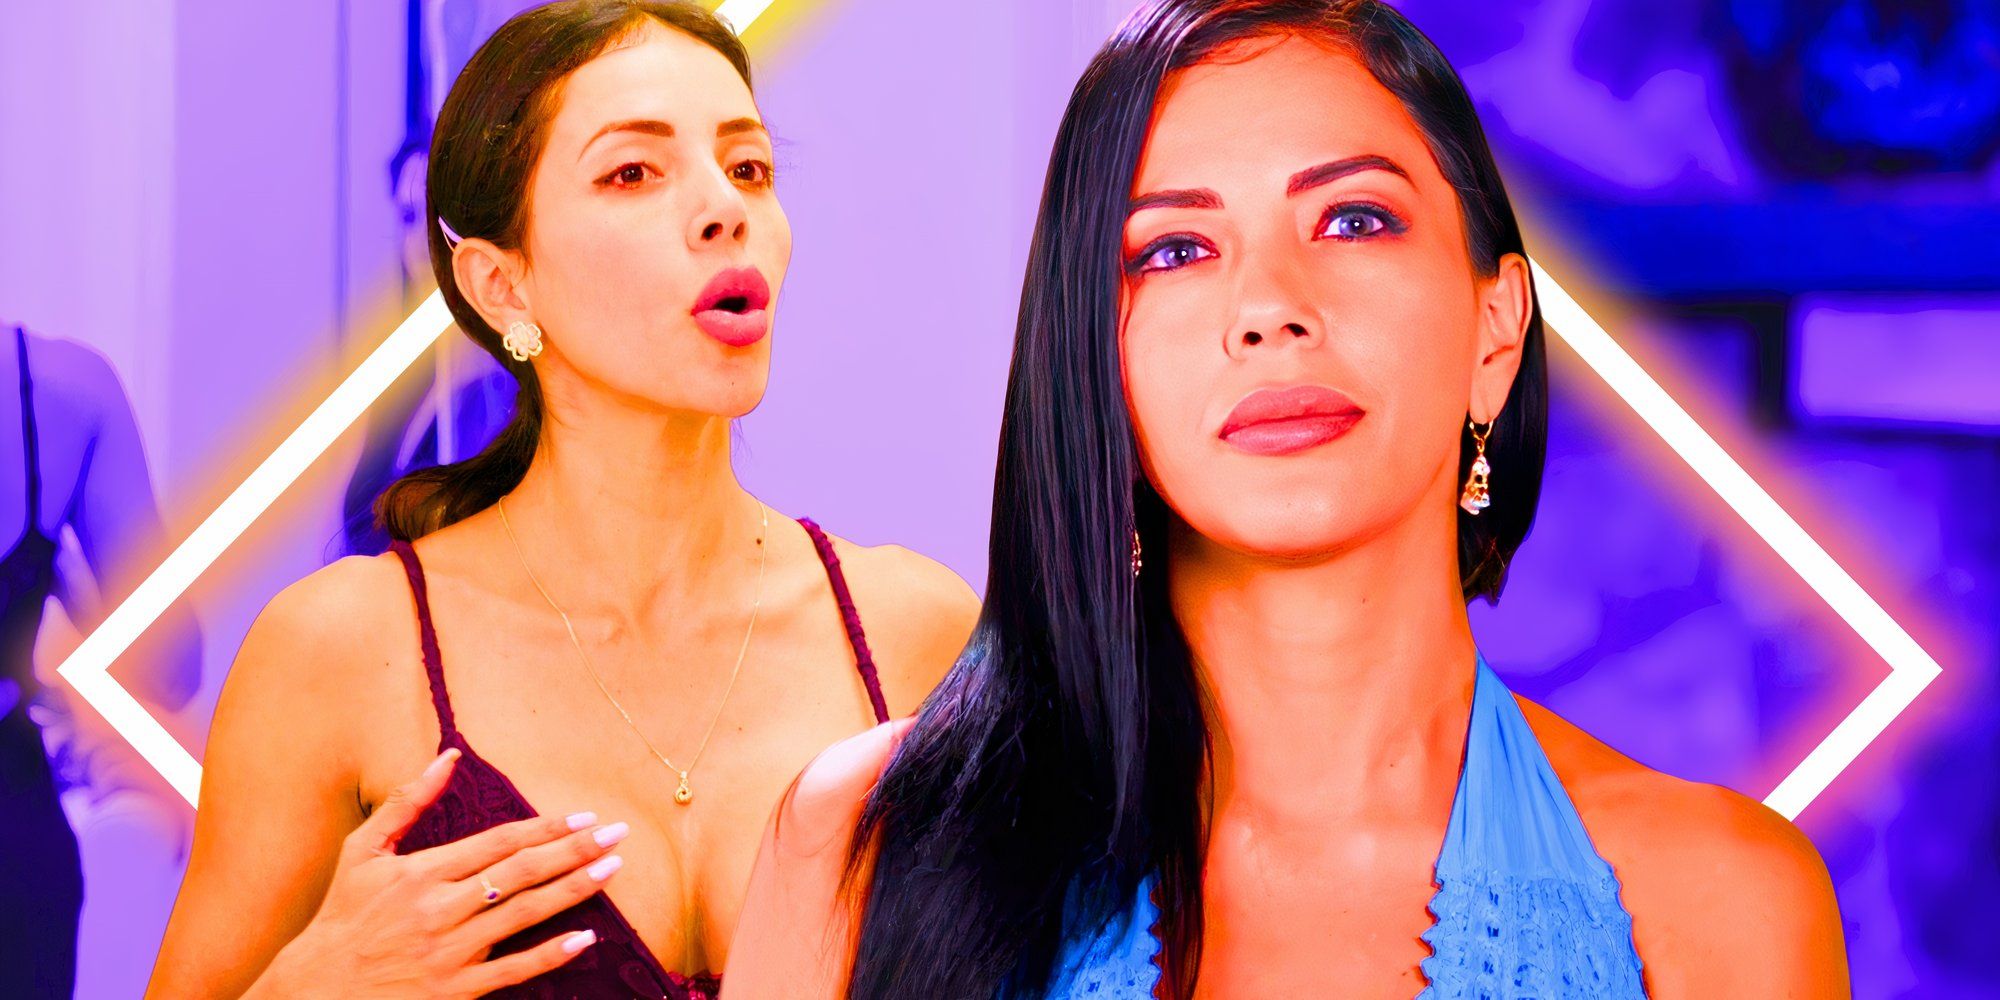 montage of Jasmine from 90 day fiance in two poses with bright background